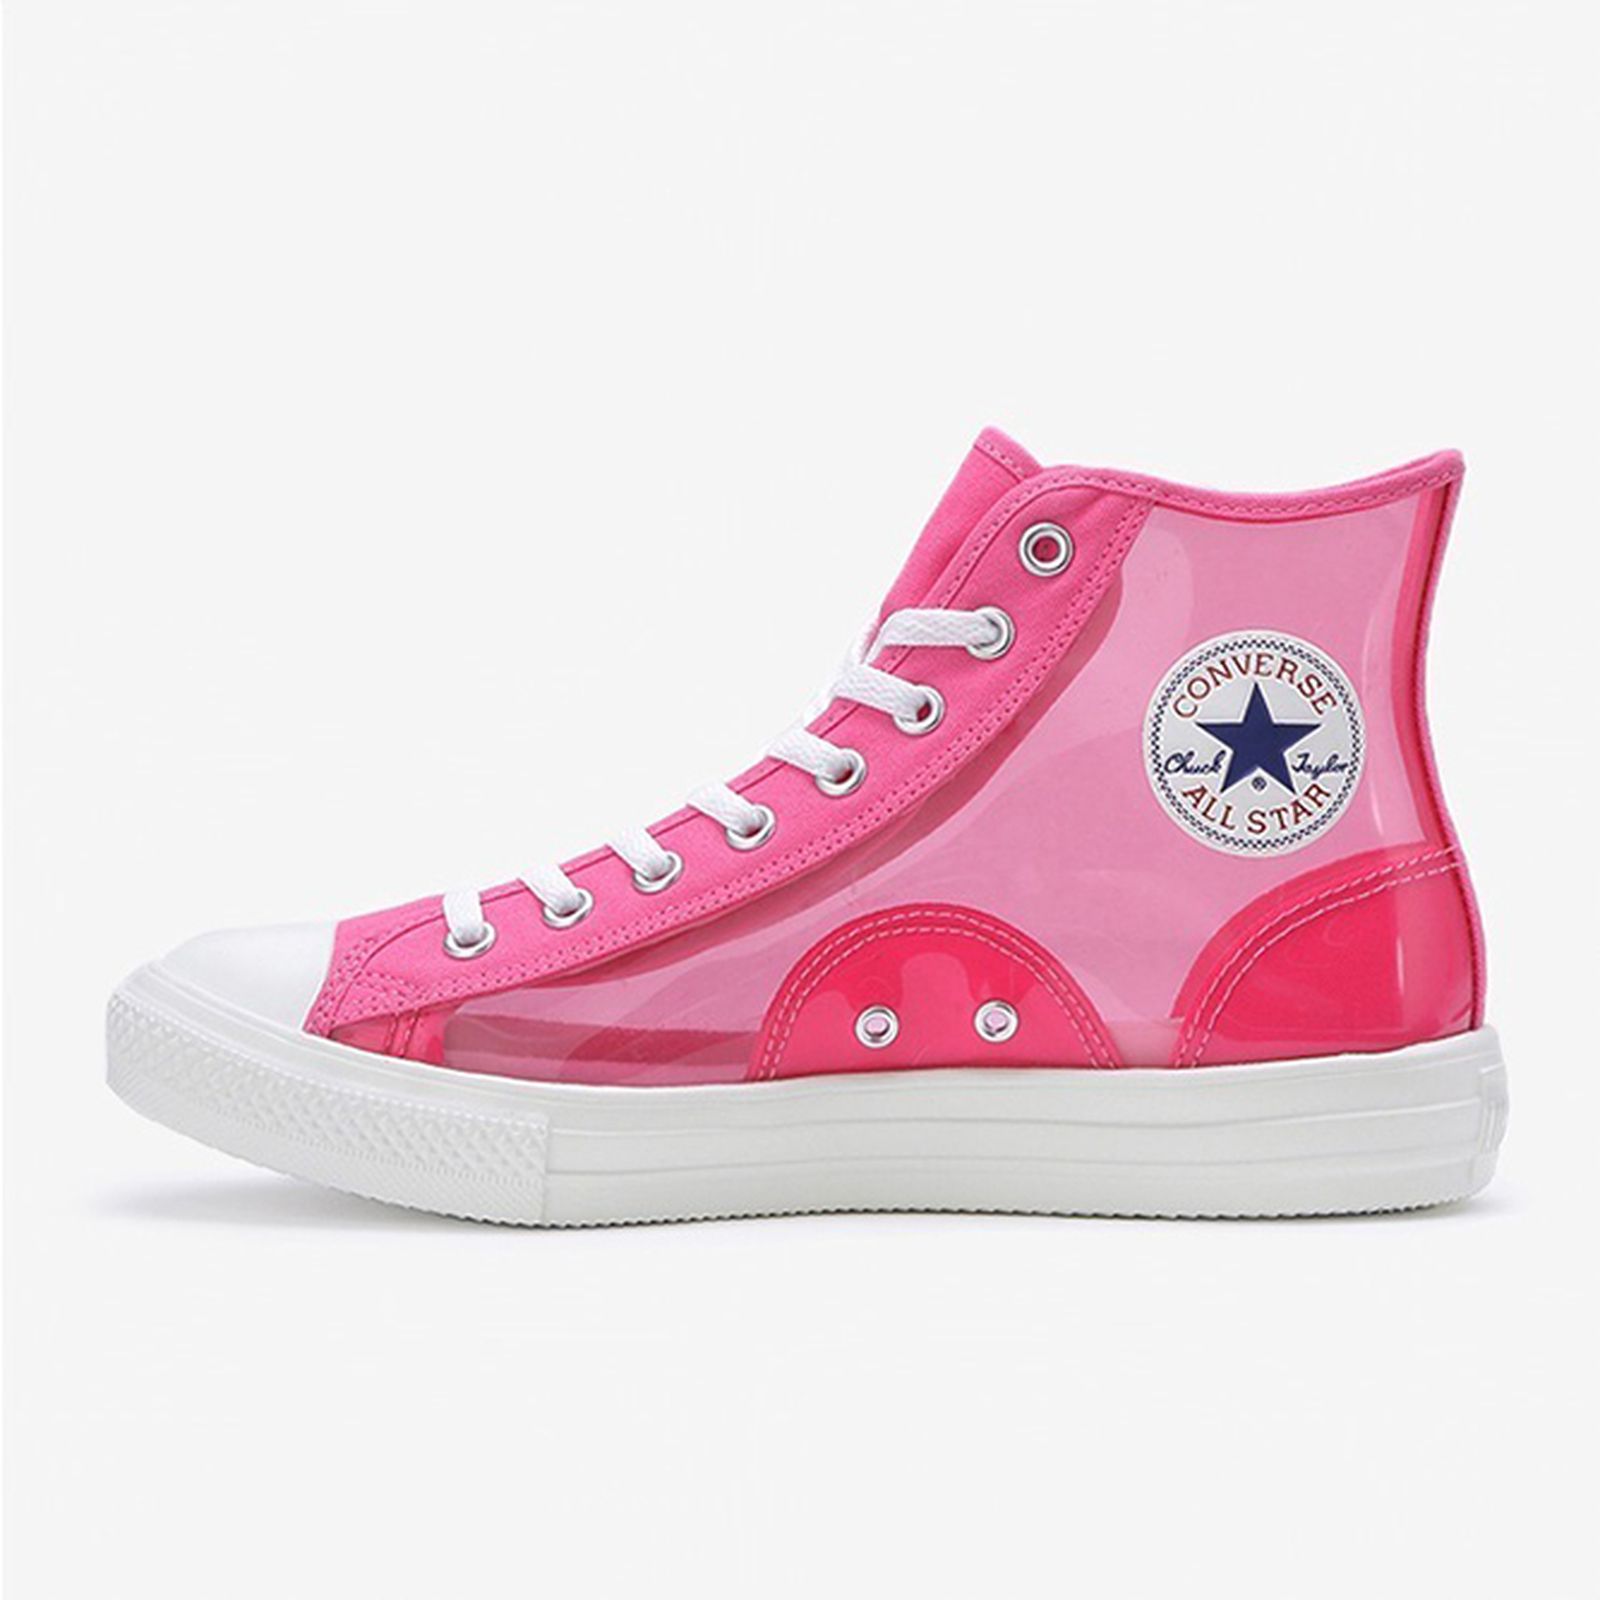 converse chuck taylor all star light clear material hi release date price